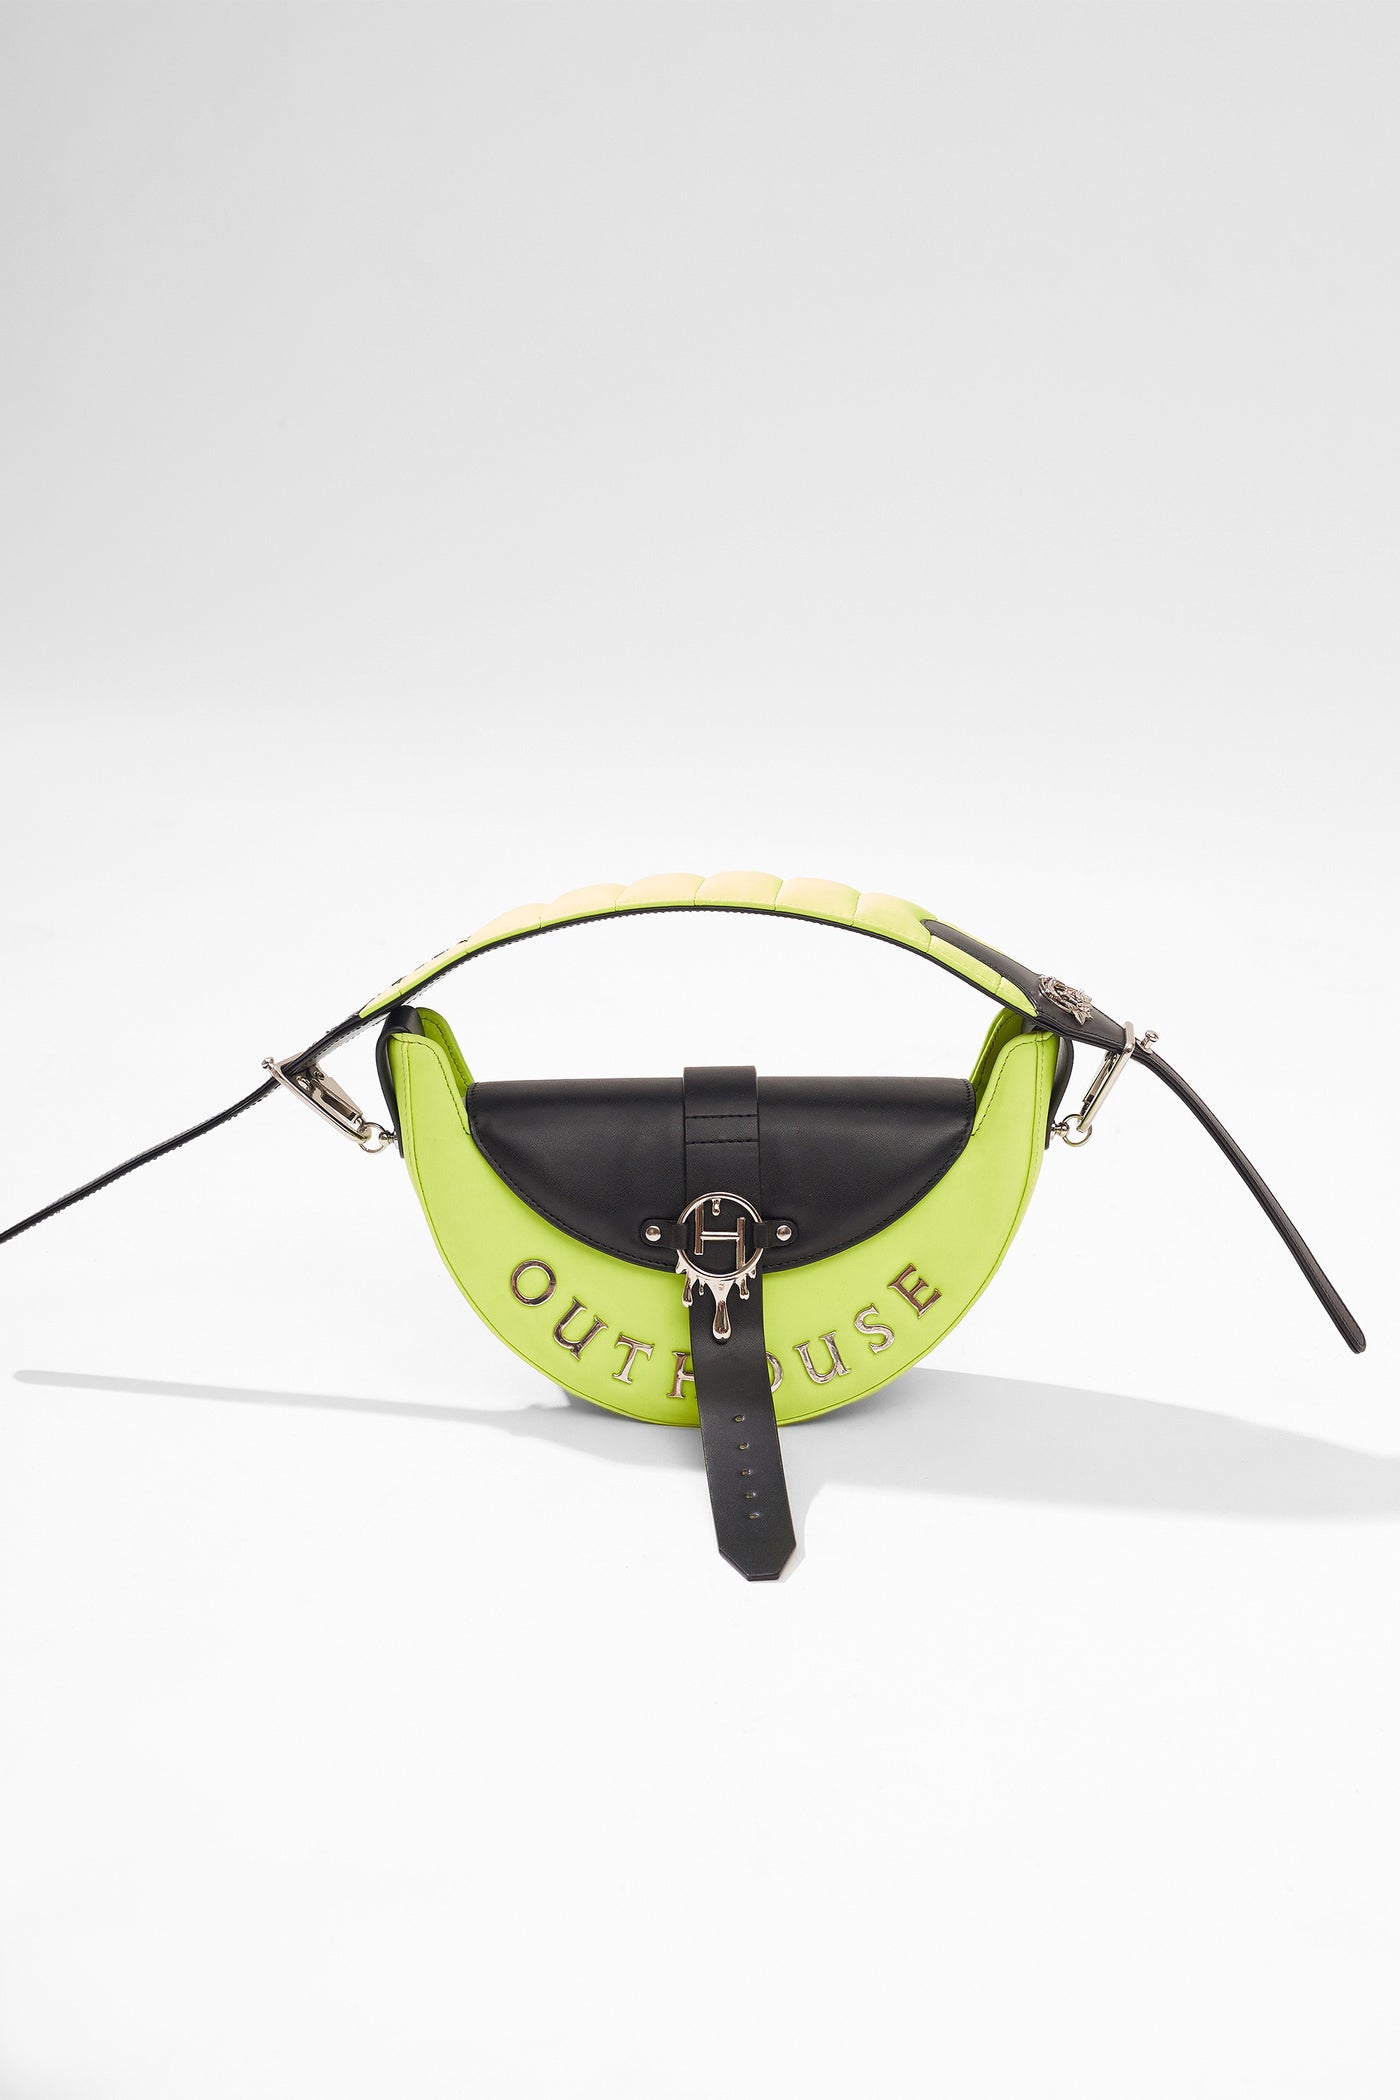 outhouse Eclipse Bag In Cyberlime Green bags accessories online shopping melange singapore indian designer wear